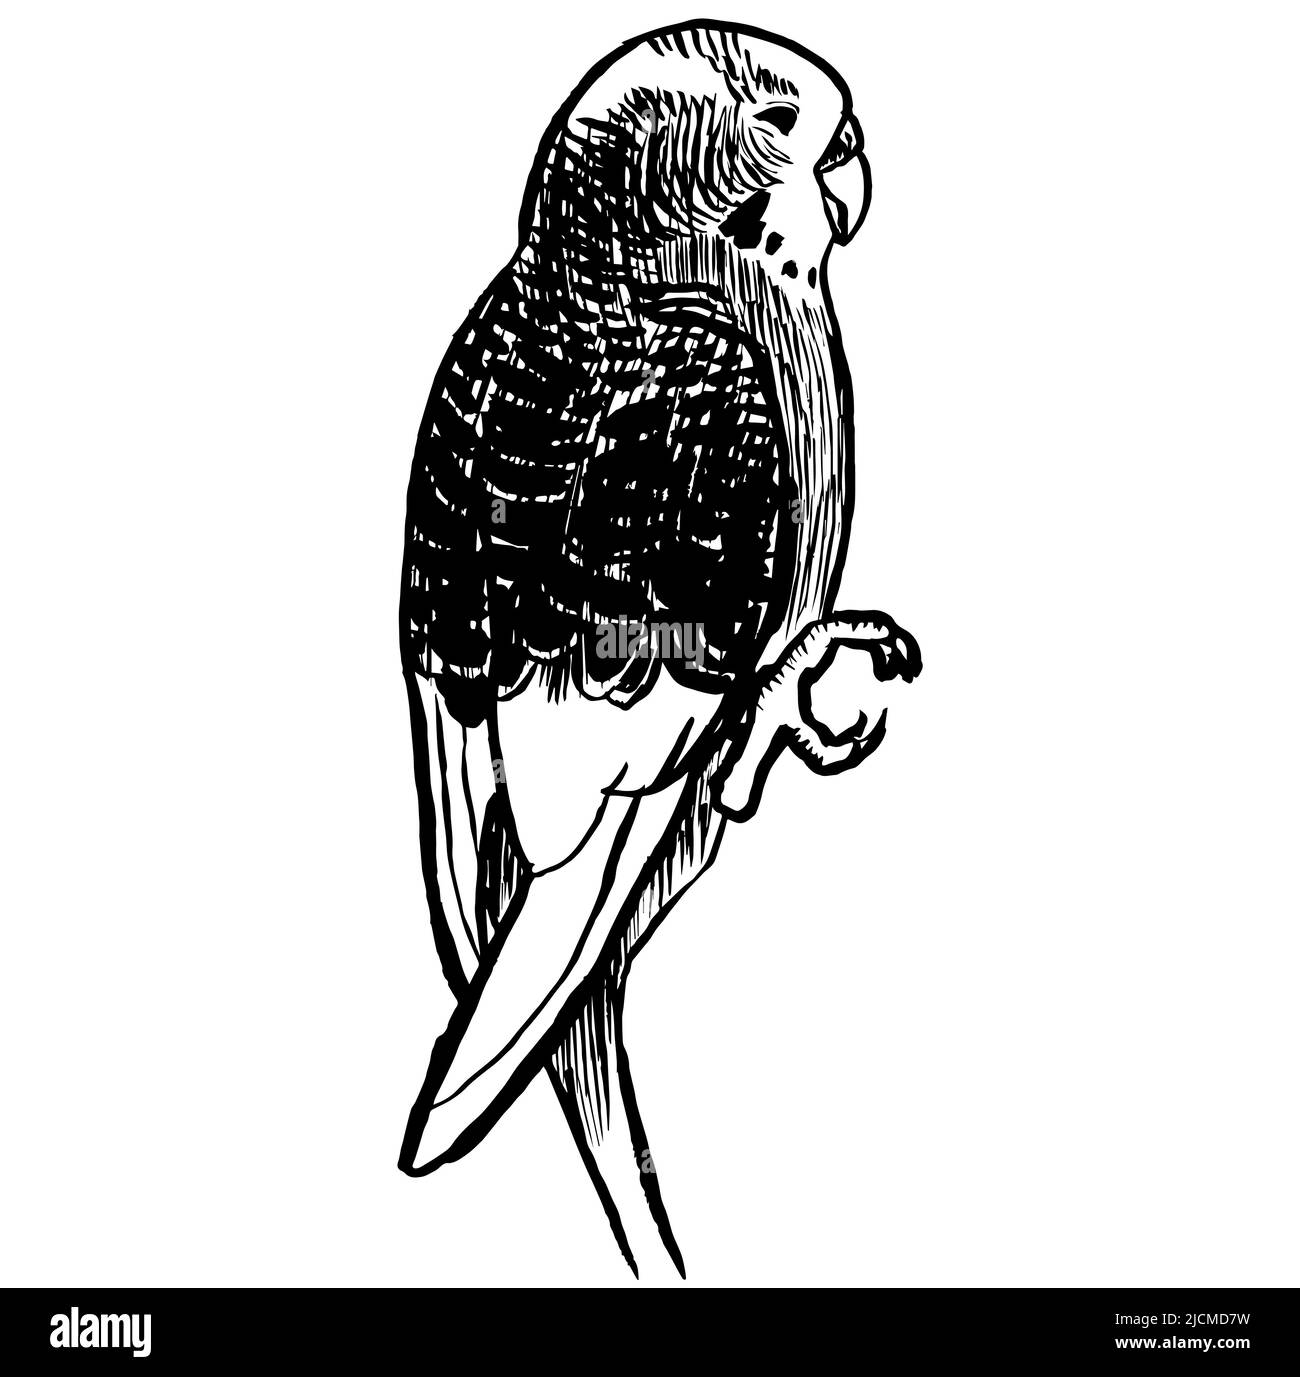 Black and white ink illustration of a a budgerigar parakeet. Stock Photo